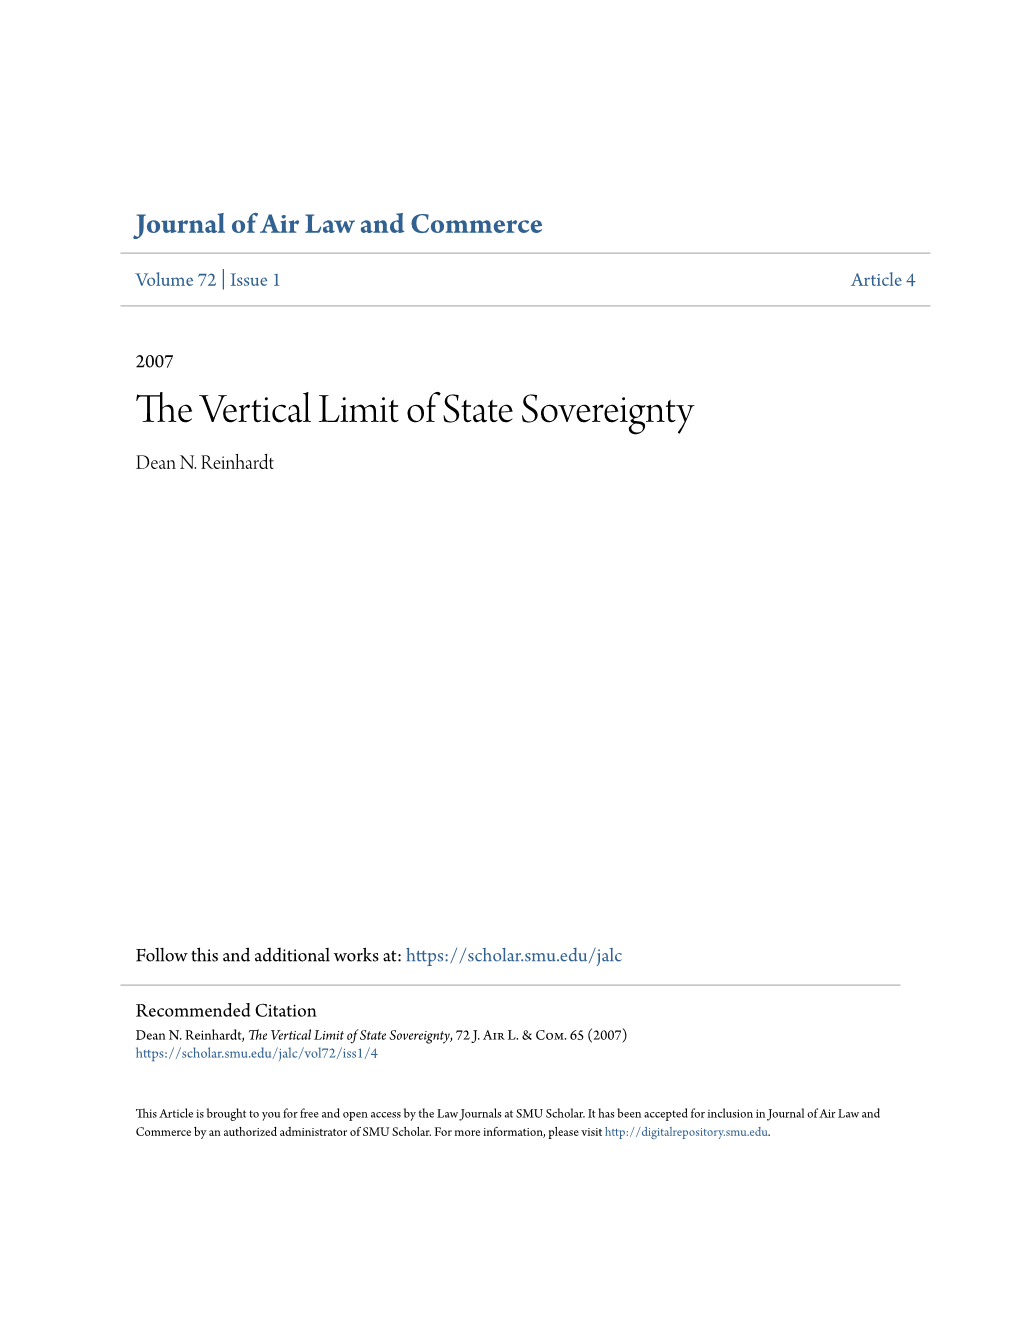 The Vertical Limit of State Sovereignty, 72 J